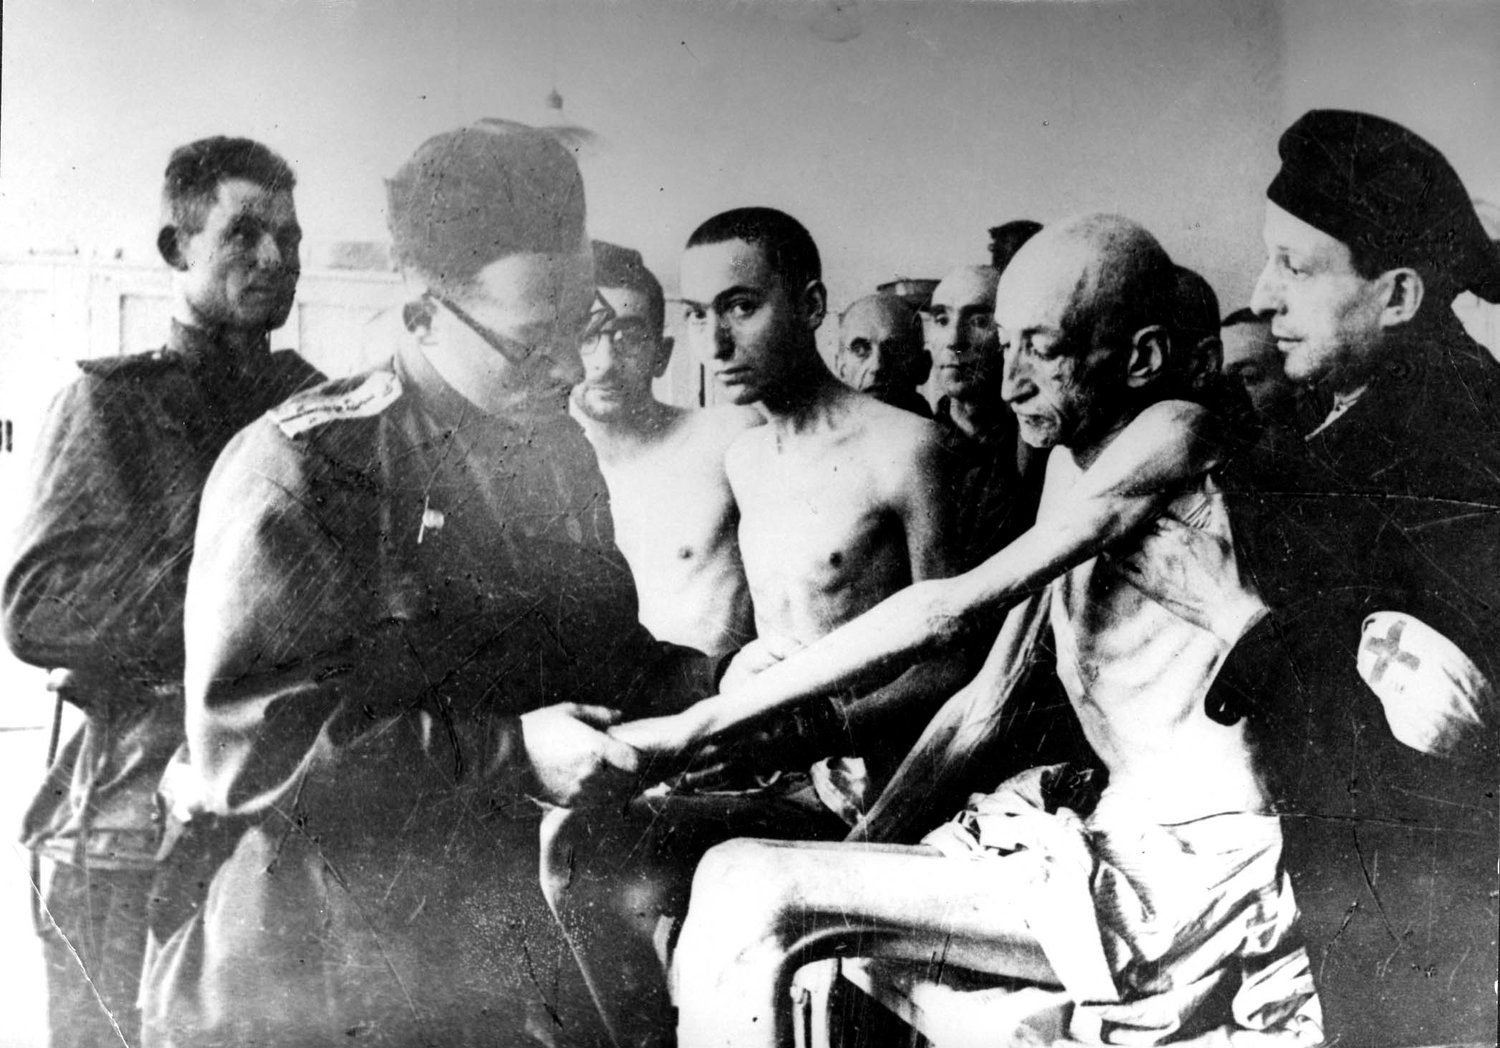 A Russian military doctor examines Holocaust survivors after the liberation of the Nazi death camp Auschwitz-Birkenau in 1945 in Oswiecim, Poland. Historians estimate that the Nazis sent at least 1.3 million people to Auschwitz between 1940-45, and it is believed that some 1.1 million of those perished there. Auschwitz was liberated by the Russian Army Jan. 27, 1945.